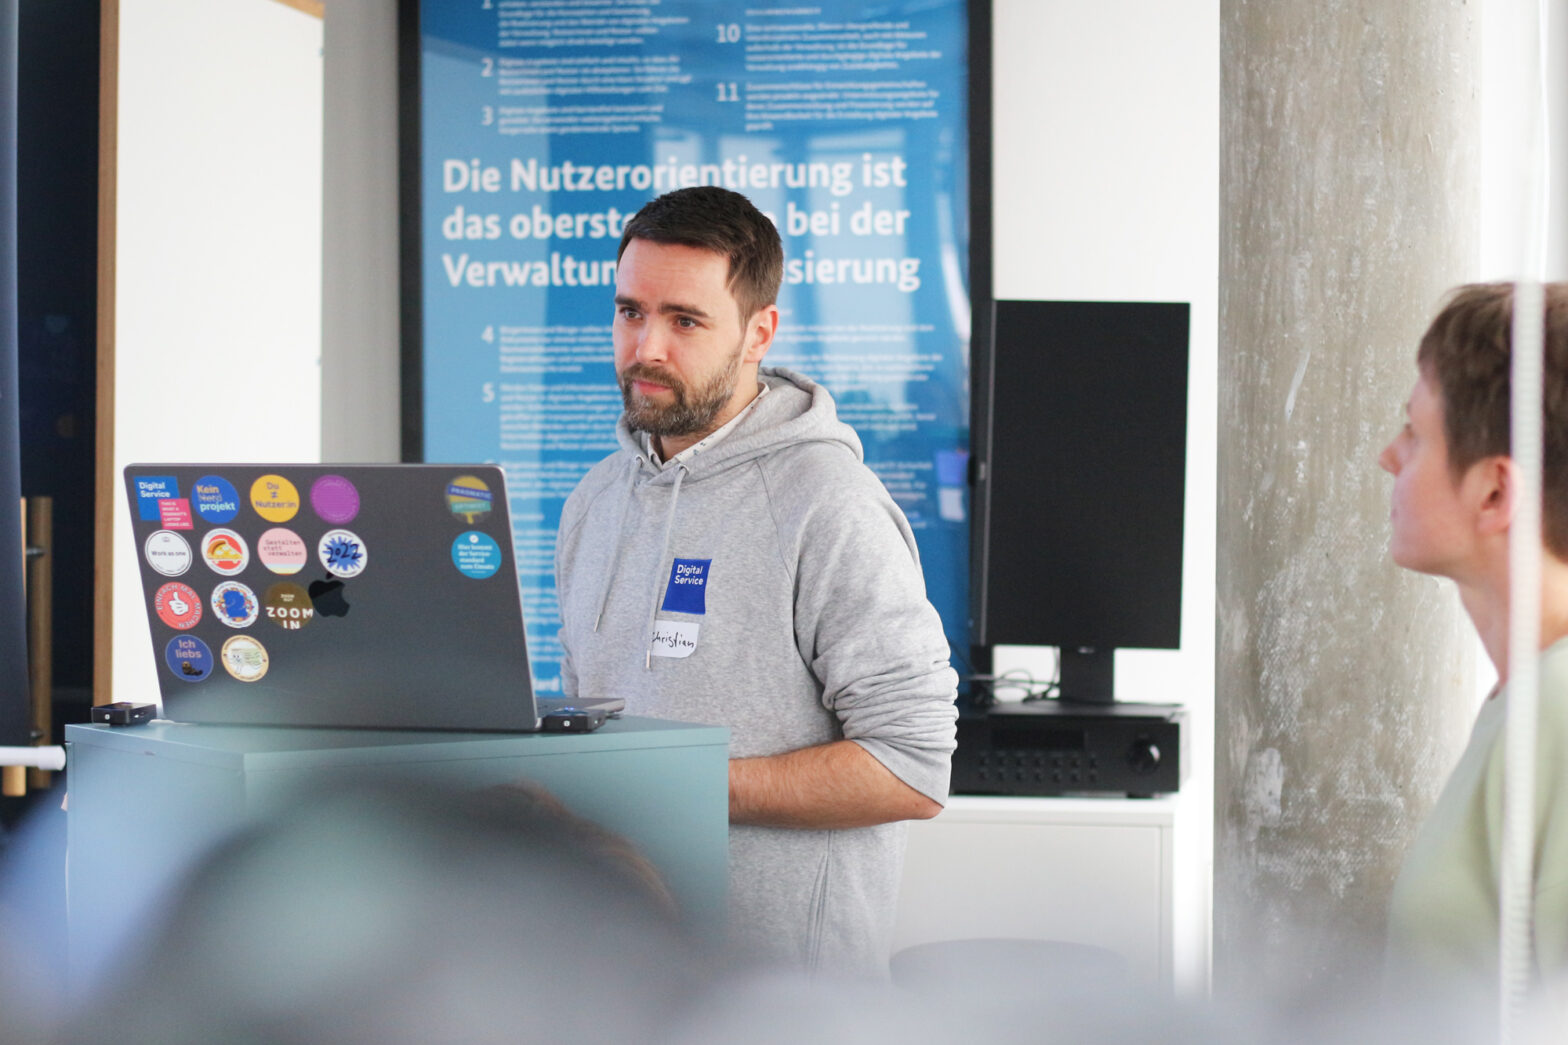 A youngish white man in a grey branded hoodie saying “Digital Service” standing in front of a podium with a computer with lots of colourful stickers; in the background is a poster that reads “User-centricity is the key principle when digitalising administration” – a woman with shorter hair is standing on the side looking at him